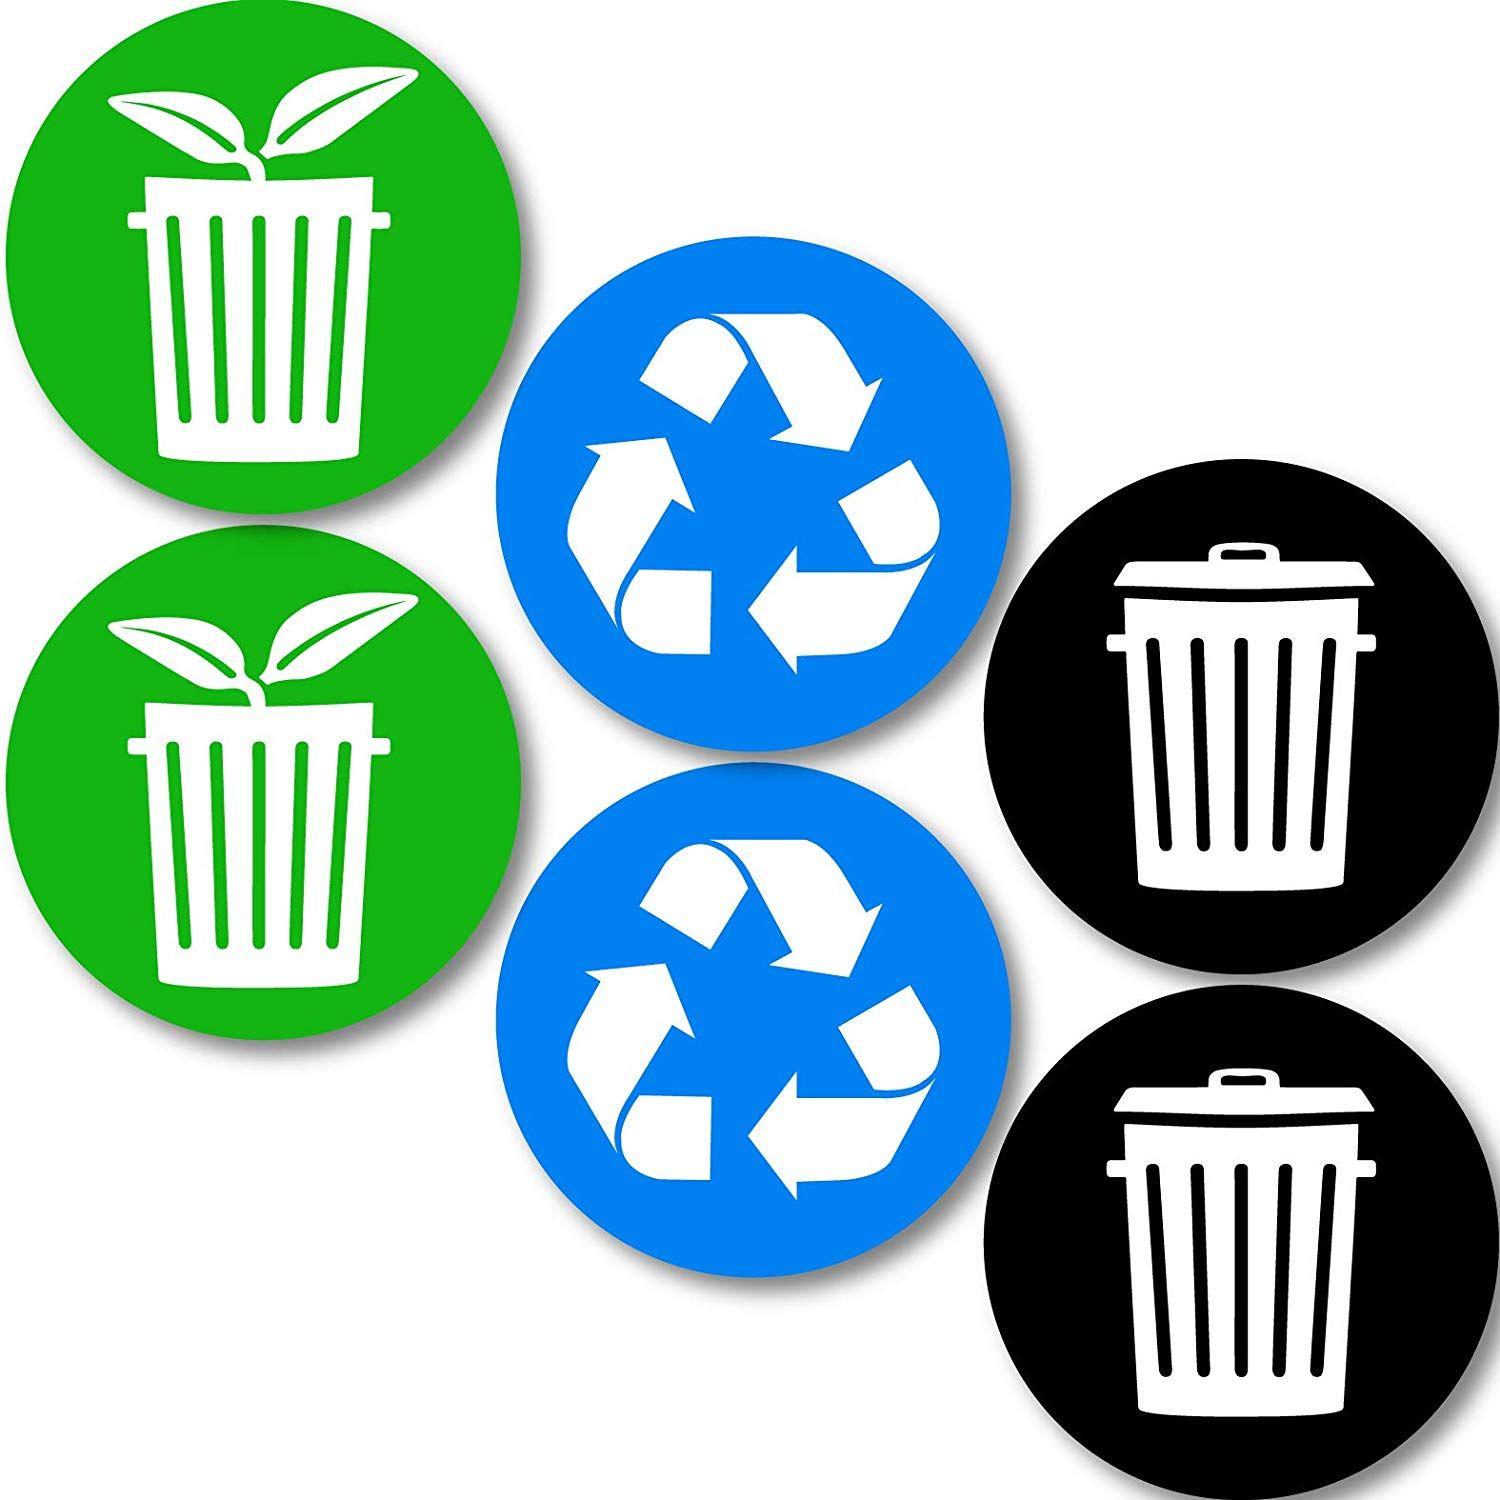 Trash Logo - Amazon.com: Recycle and Trash Logo Stickers (6 Pack) 6in x 6in ...